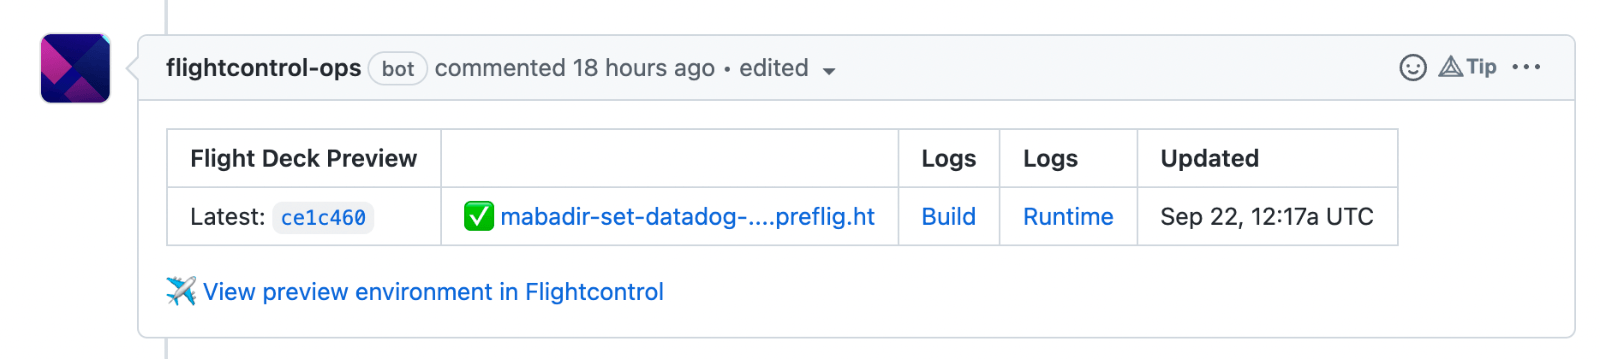 Github comment showing preview environment deployment status